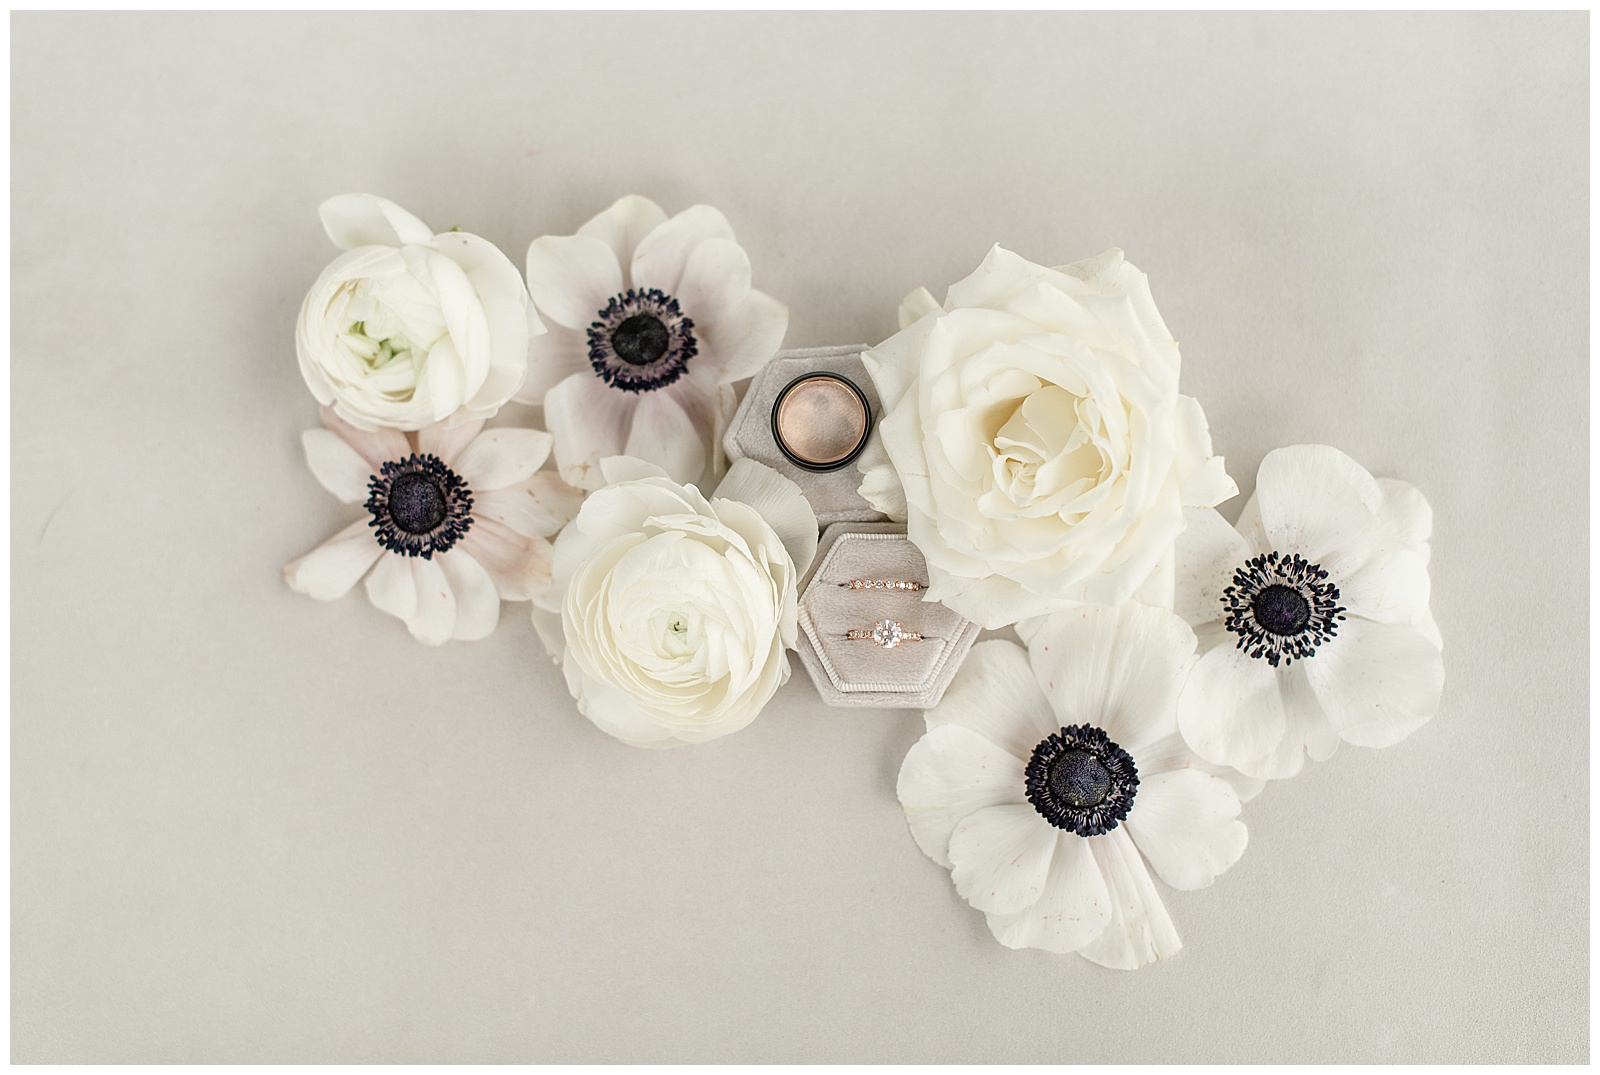 couples' wedding rings in boxes surrounded by white roses and white and black anemone flowers at historic ashland